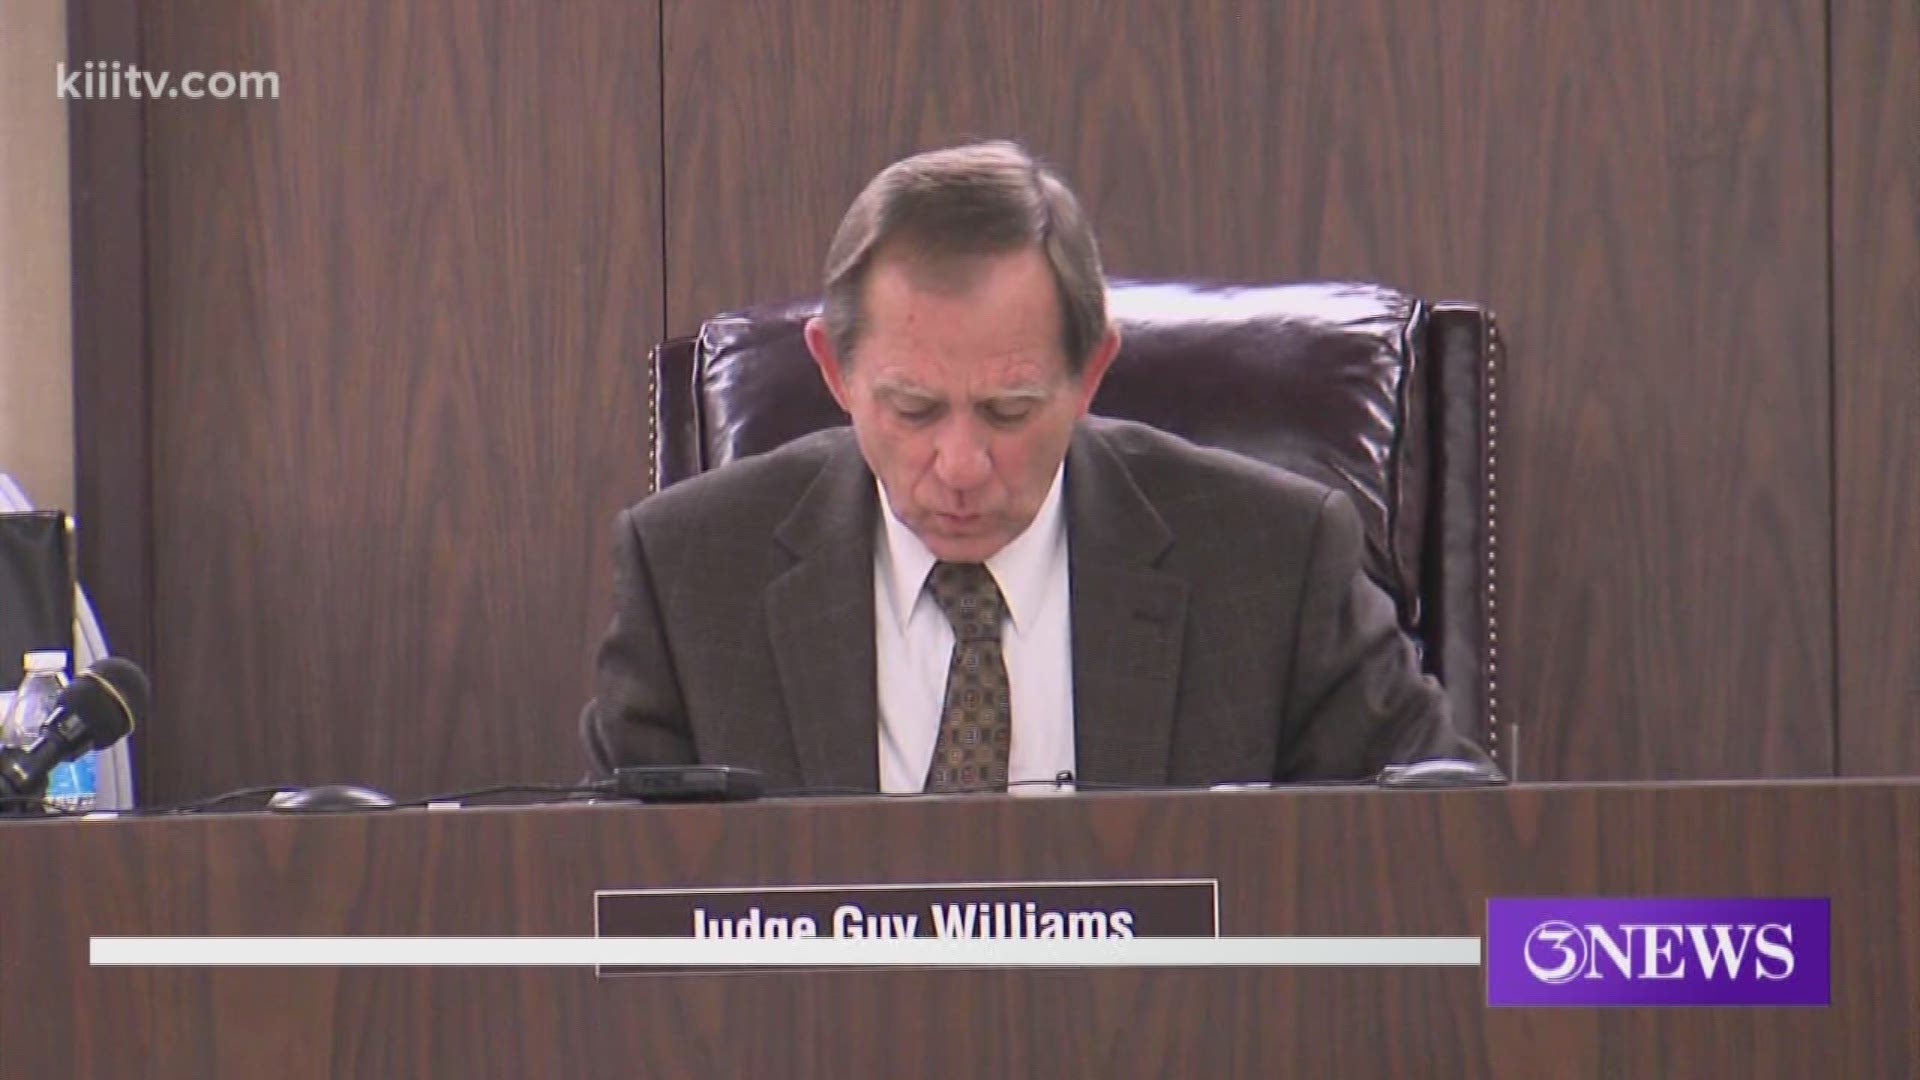 The State Commission on Judicial Conduct has cleared the way for former 148th District Court Judge Guy Williams to run for office.